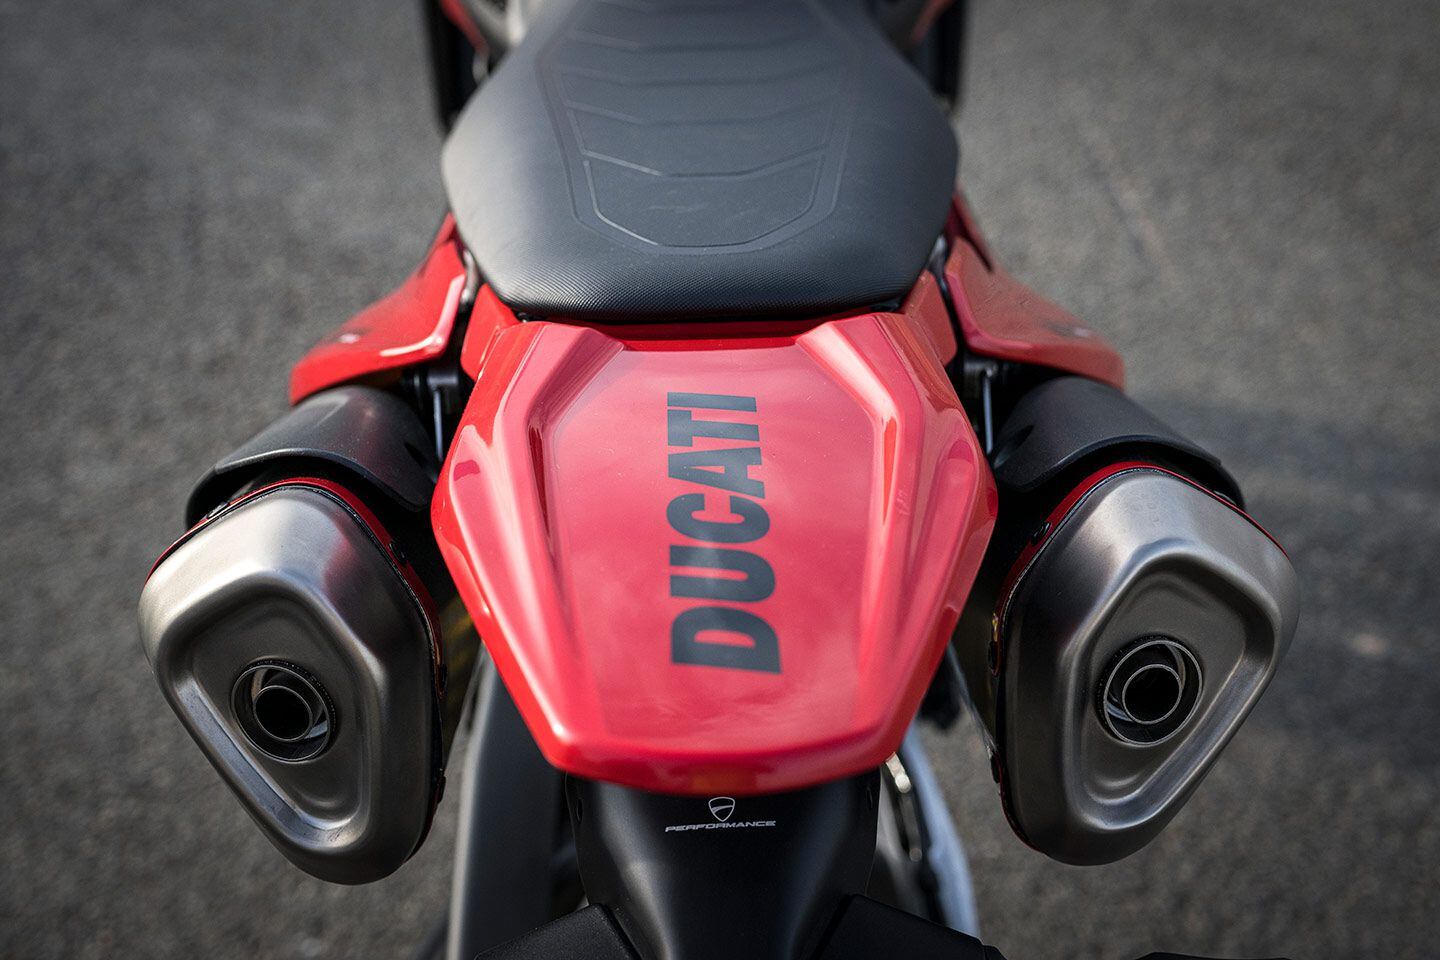 Business in the front, party in the back. Stock exhaust noise is by necessity a bit muted, but stepping up to a Termignoni exhaust wakes the bike up, both in terms of sound and power.